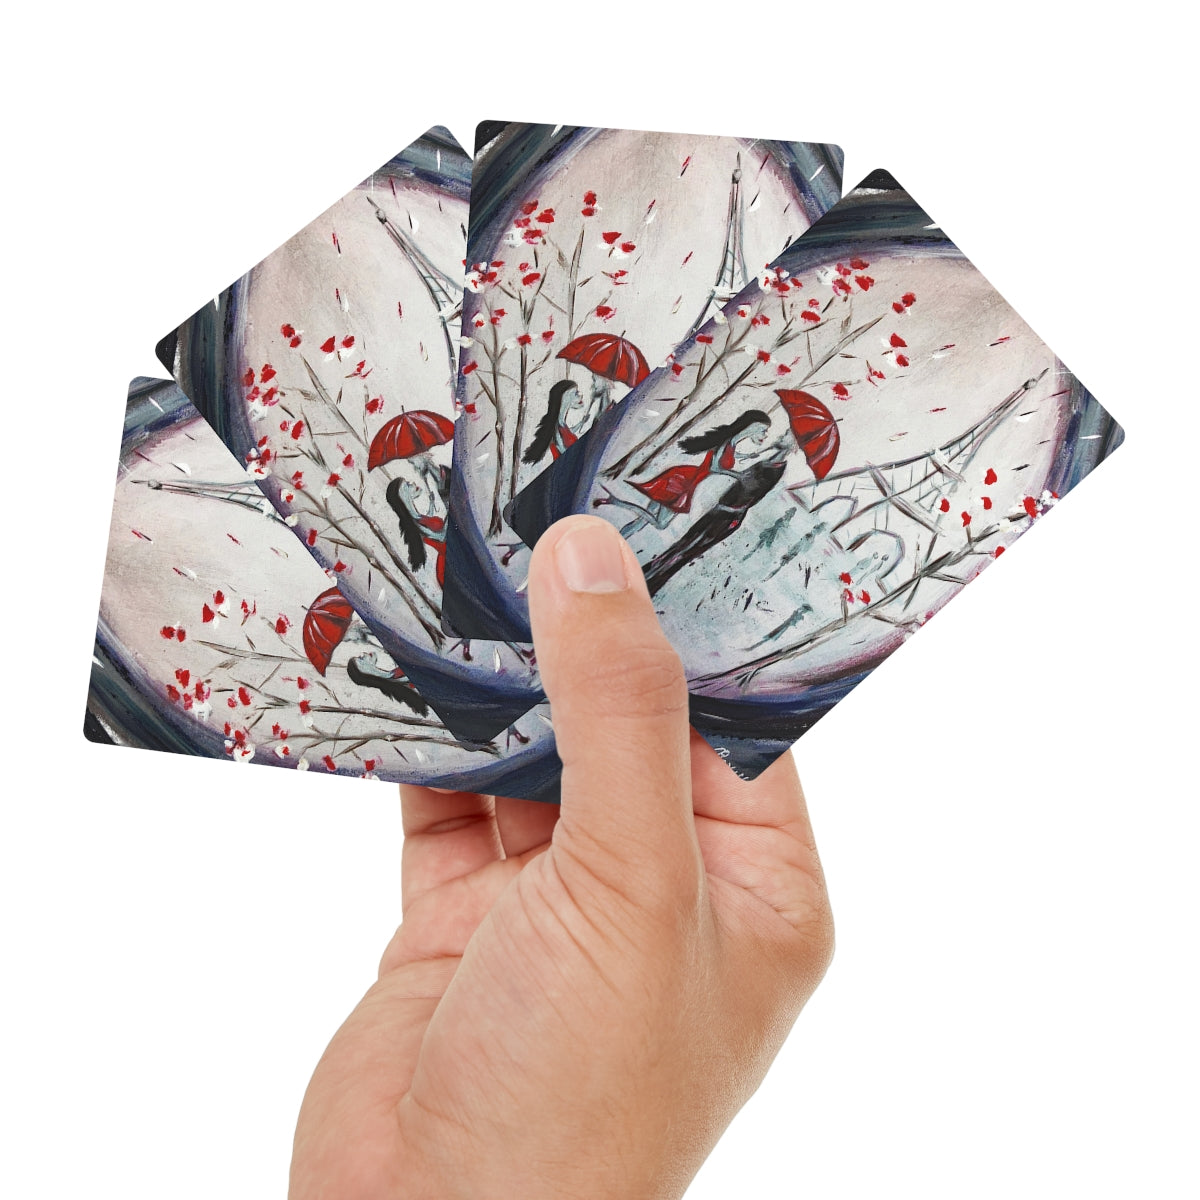 I Only have eyes for You Romantic  Poker Cards/Playing Cards